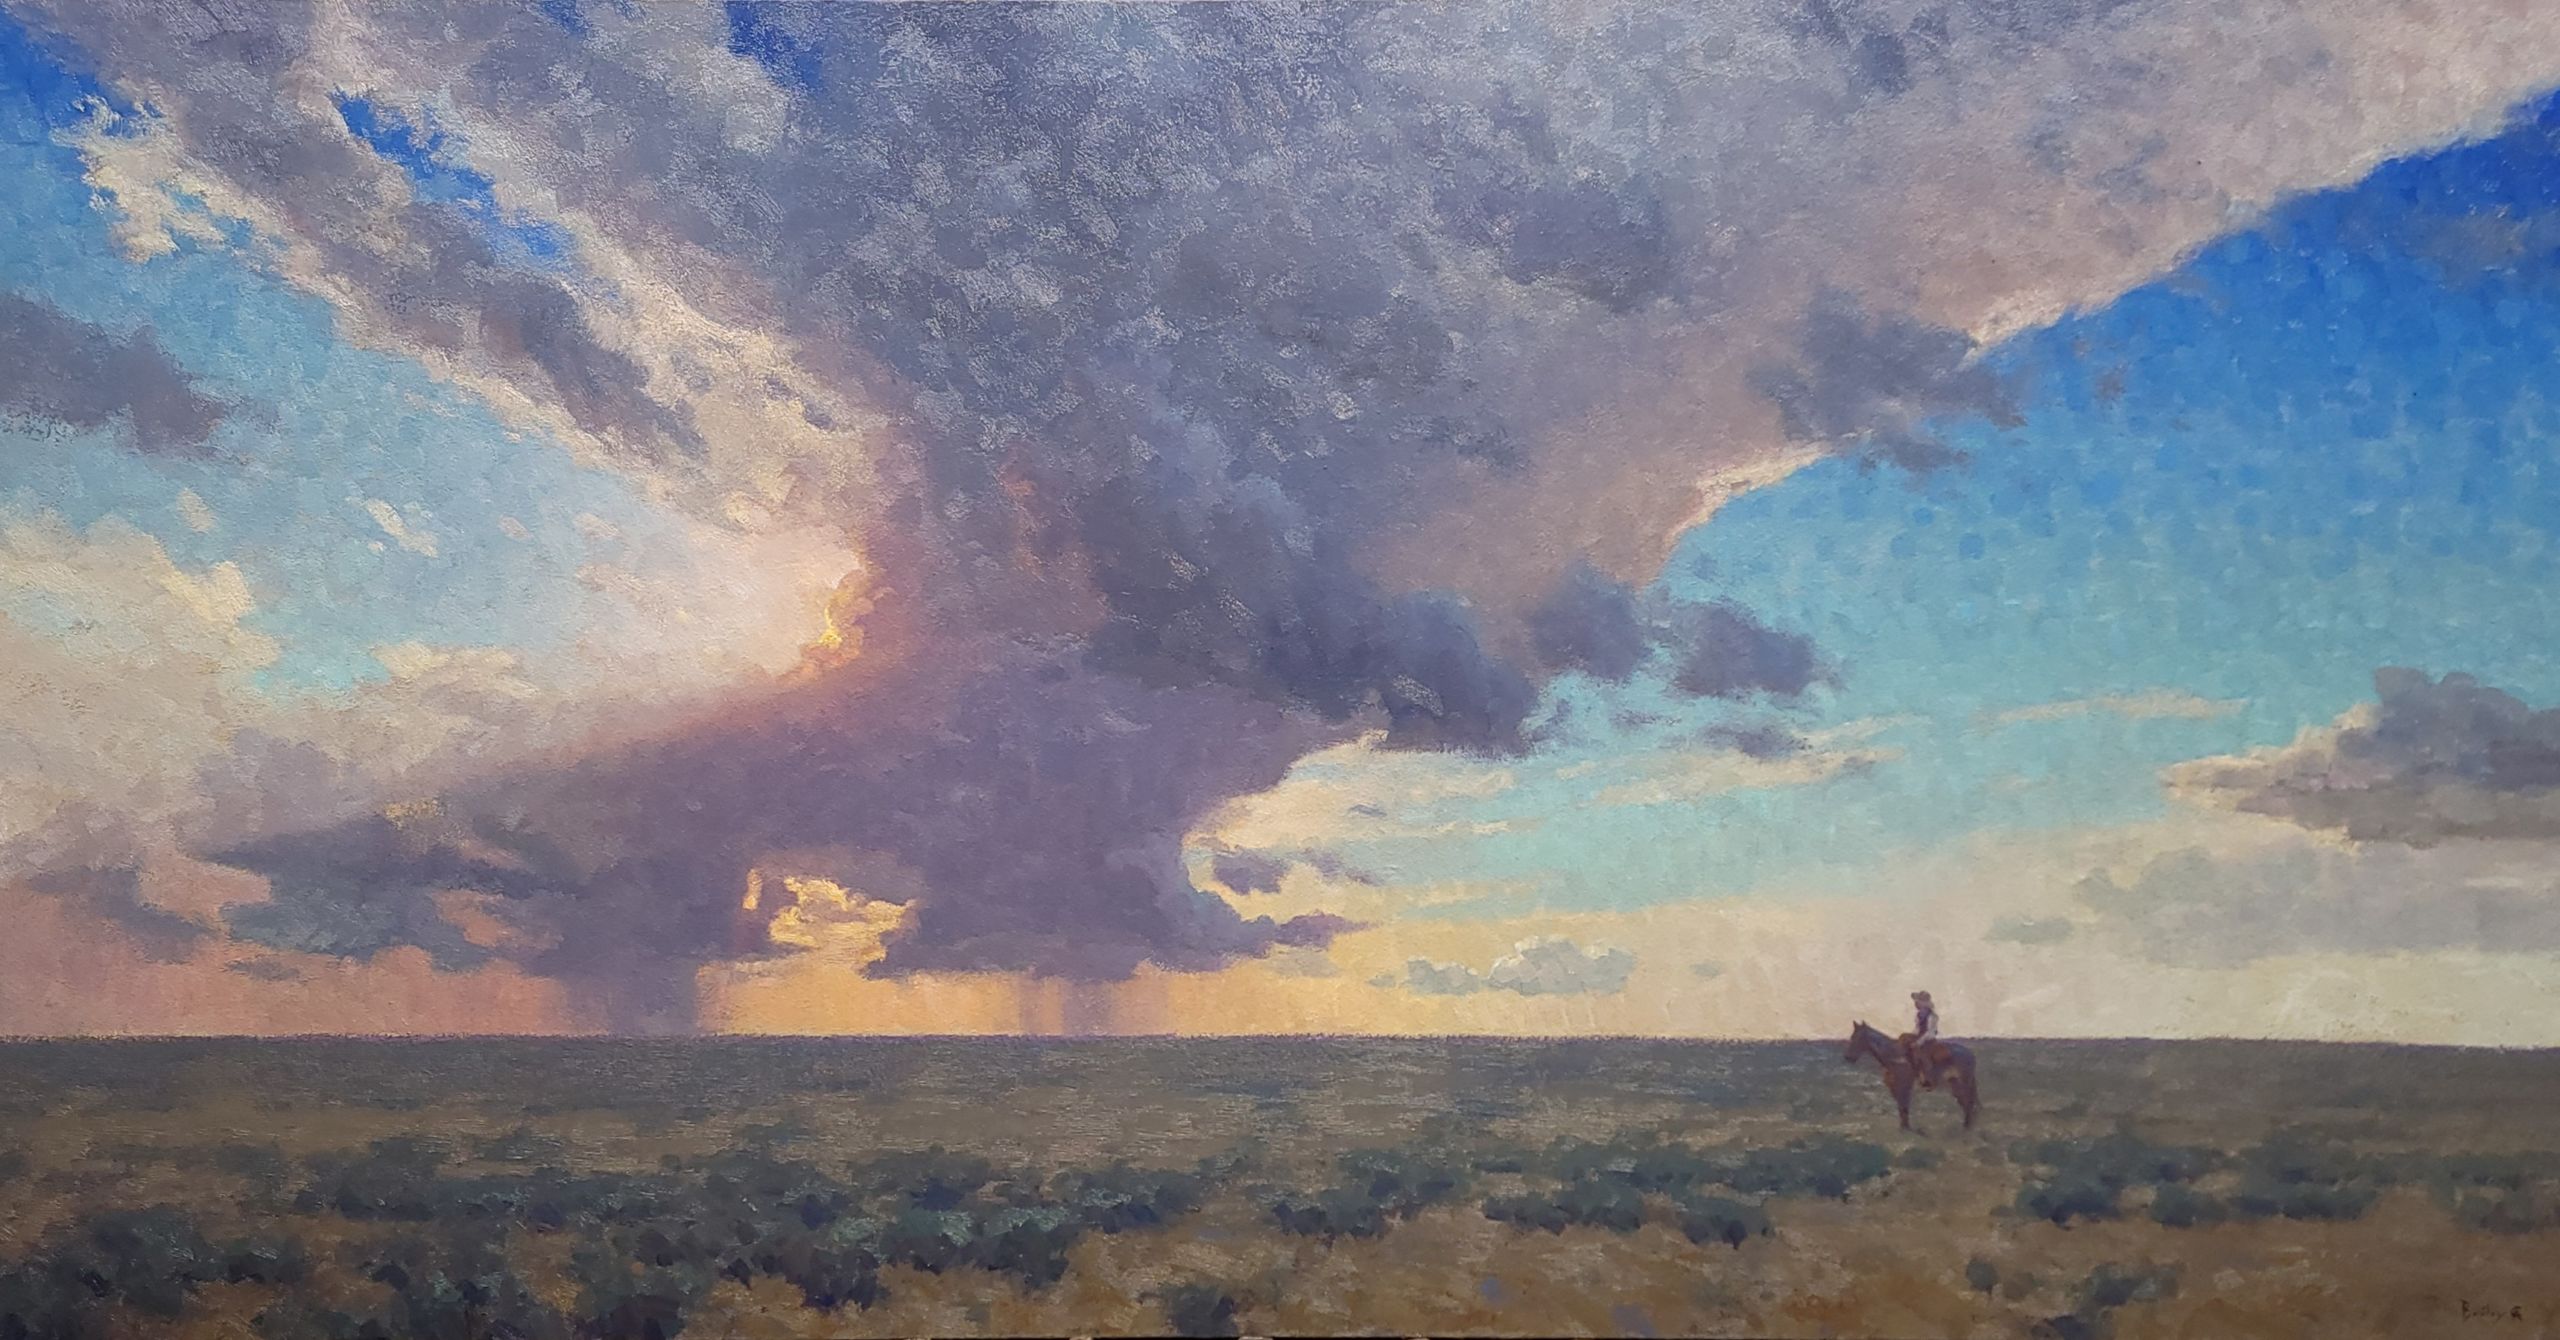 Horizontal landscape painting of open plains and big sky.